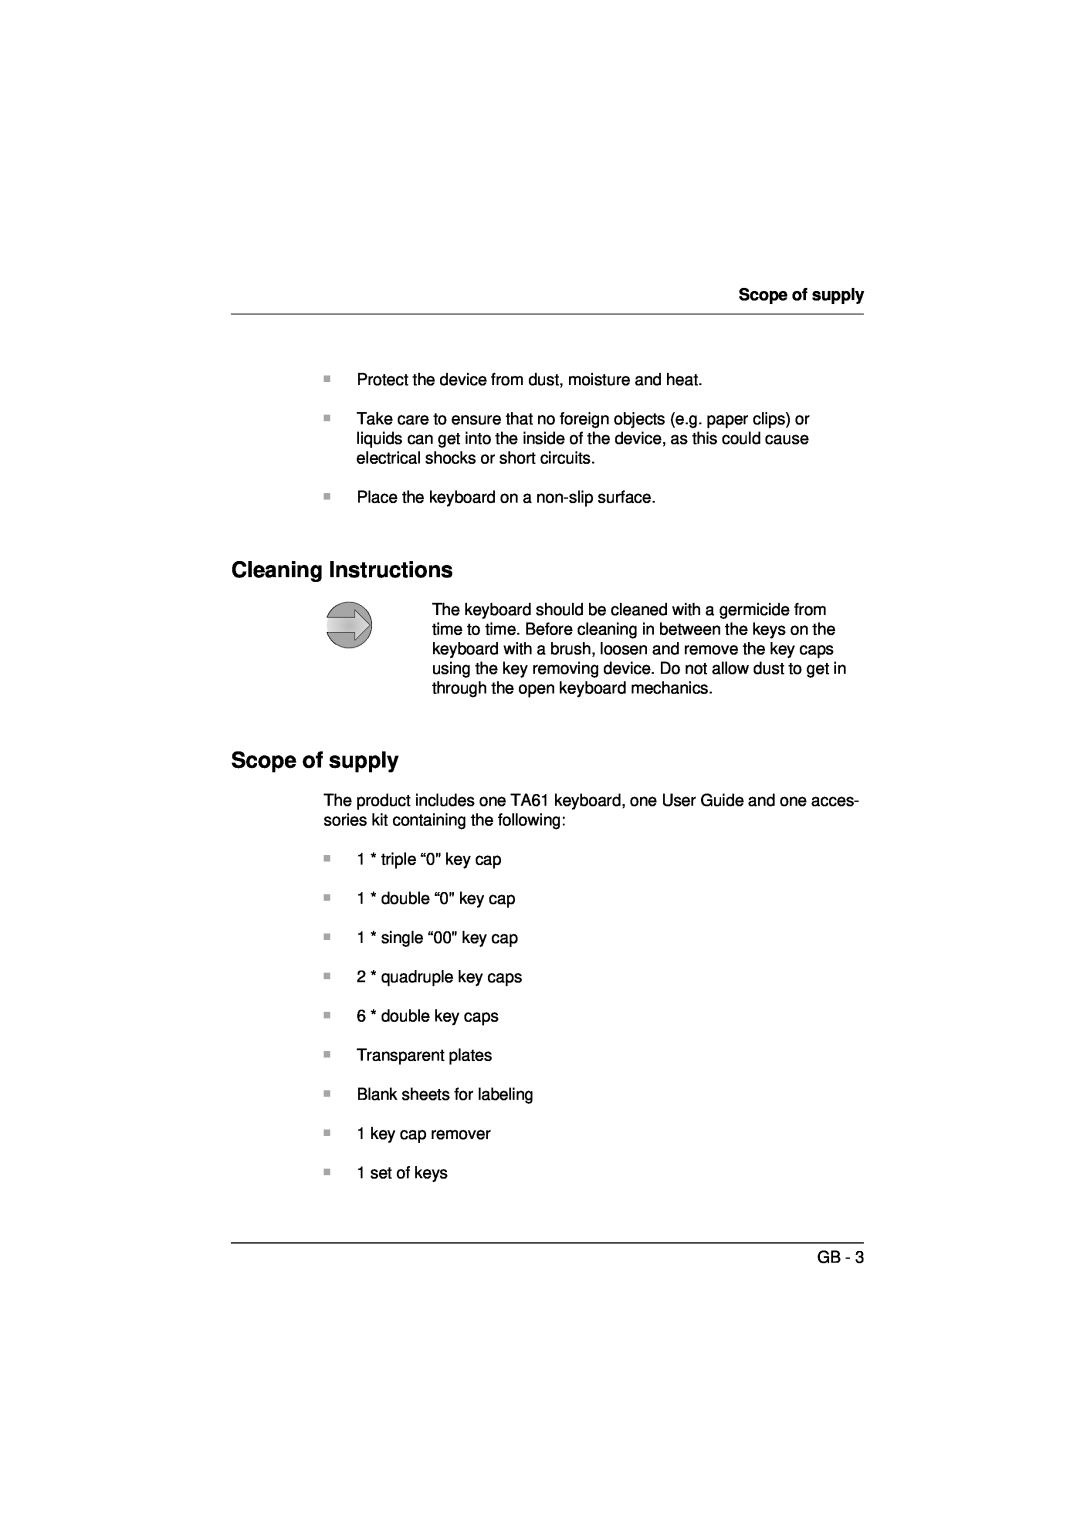 Microsoft TA61 manual Cleaning Instructions, Scope of supply 